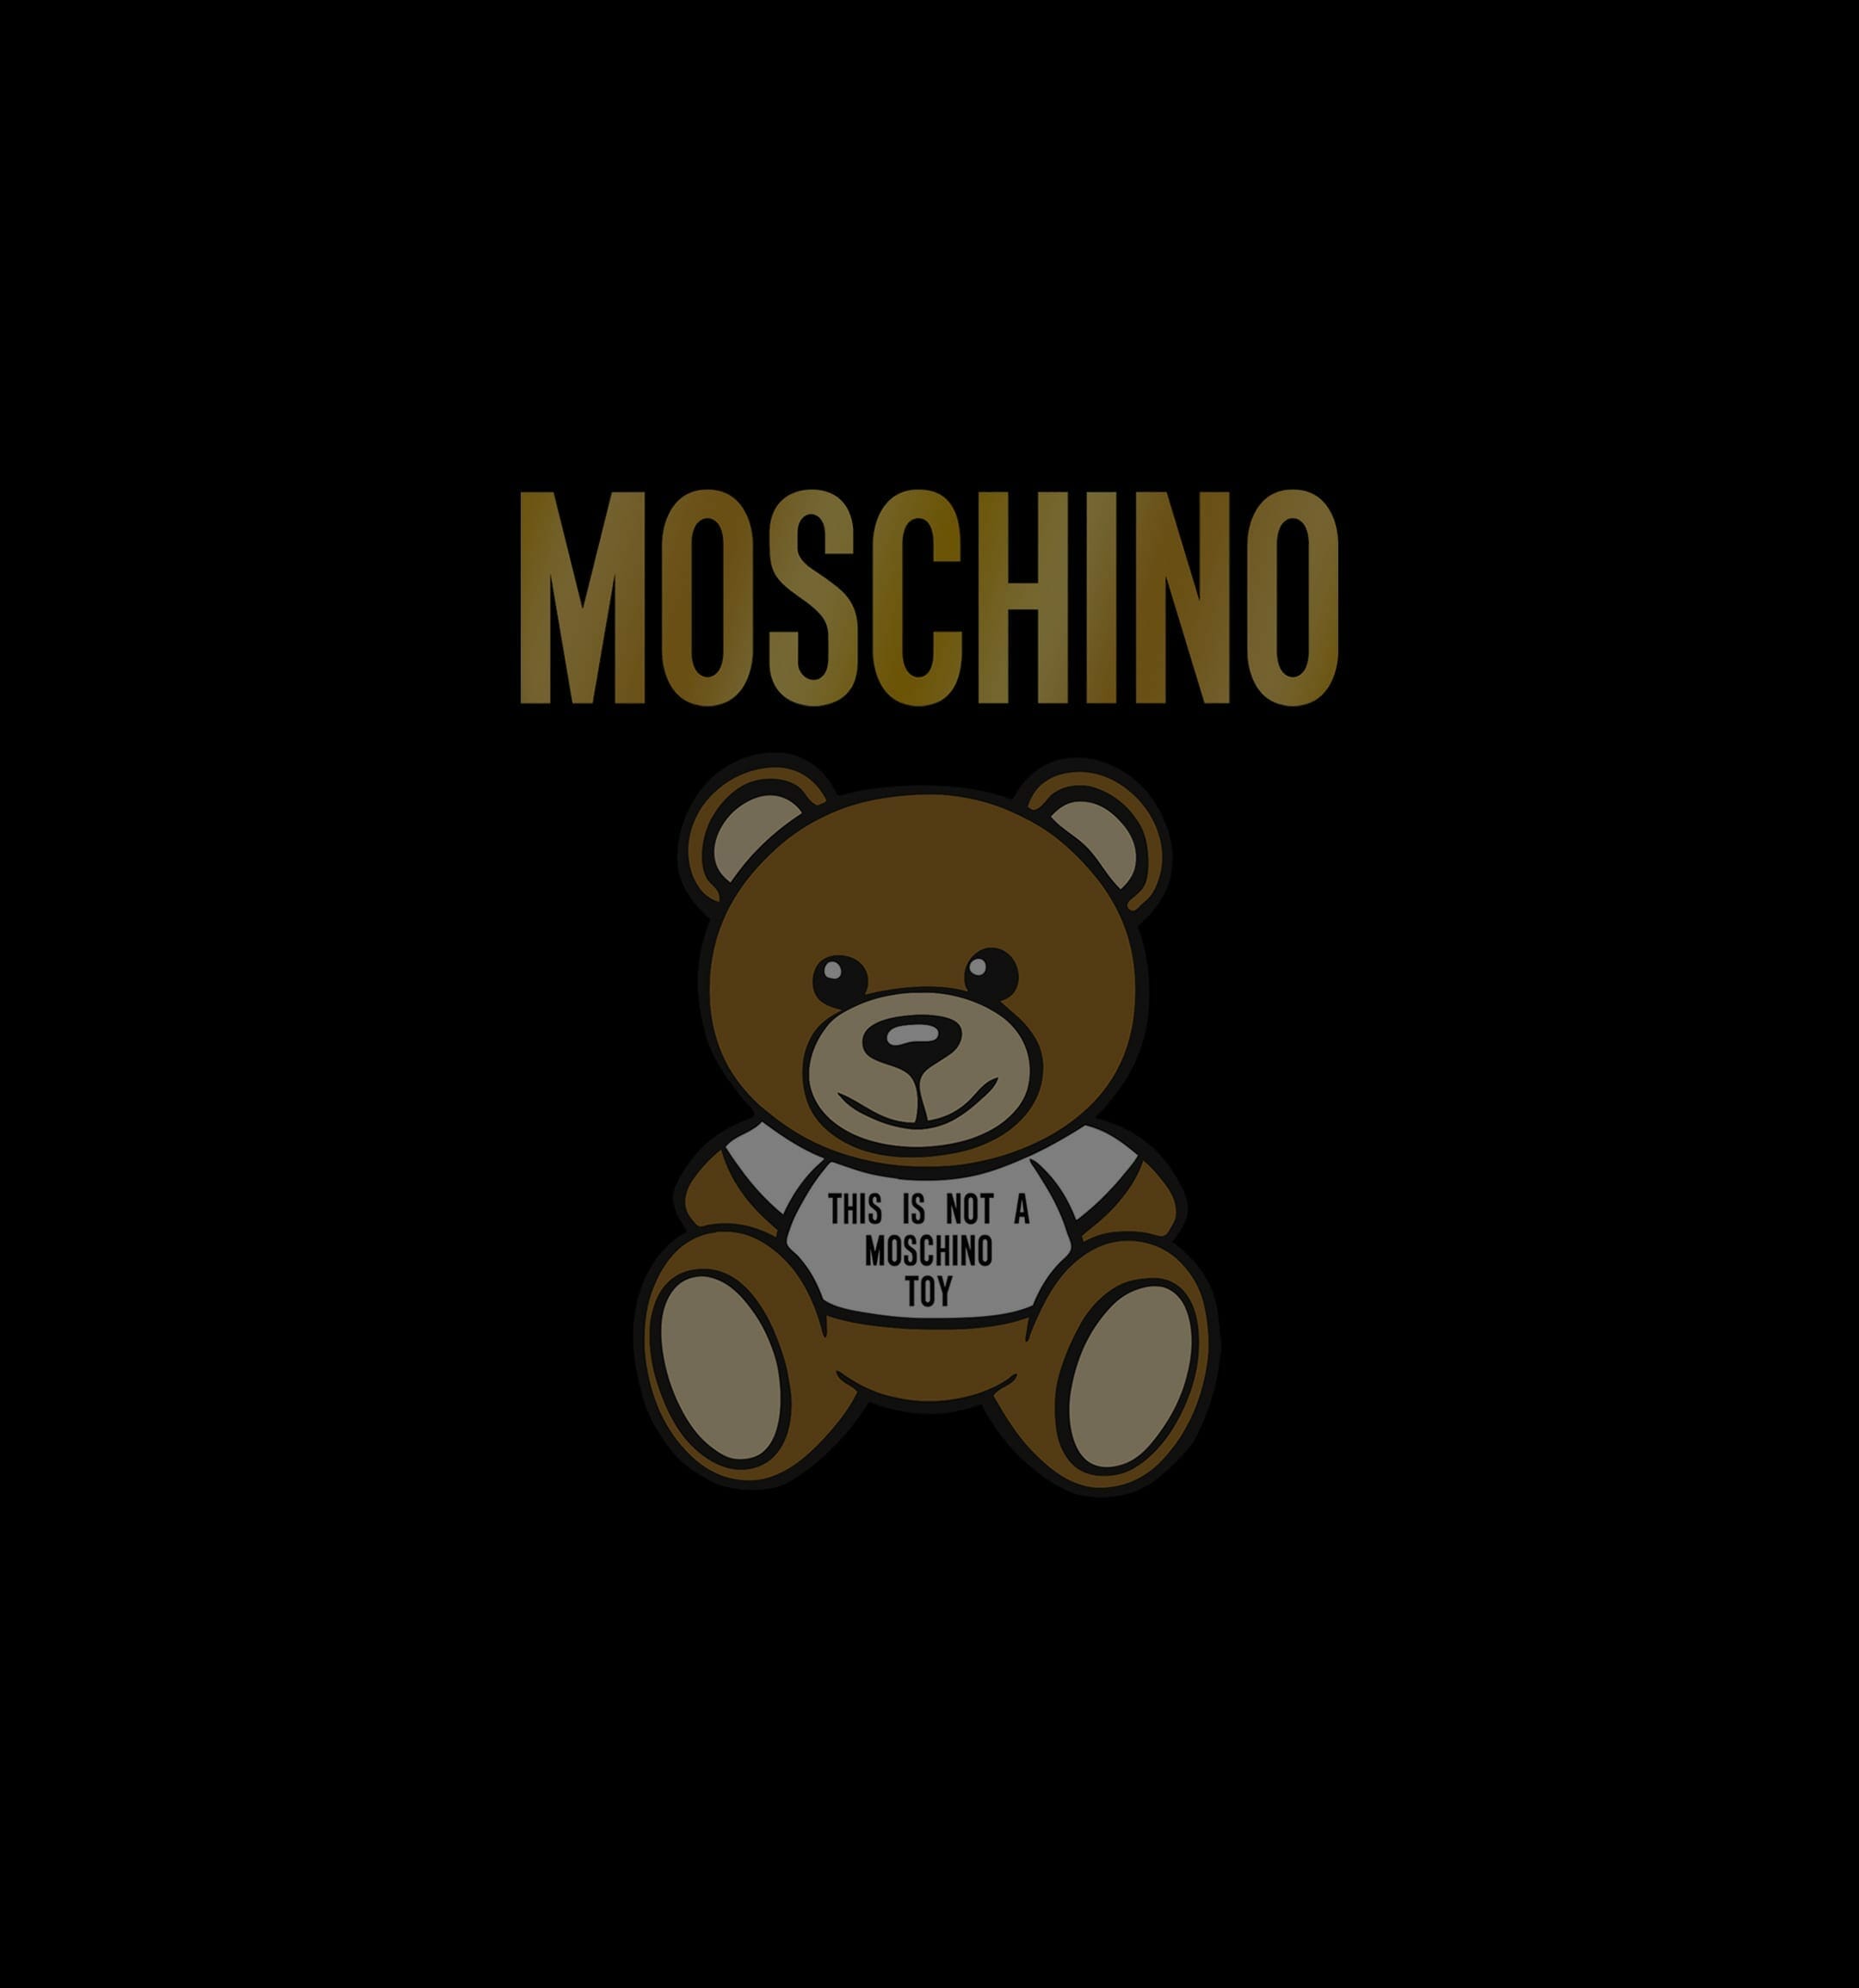 Honor V20 Moschino Edition Stock Wallpapers